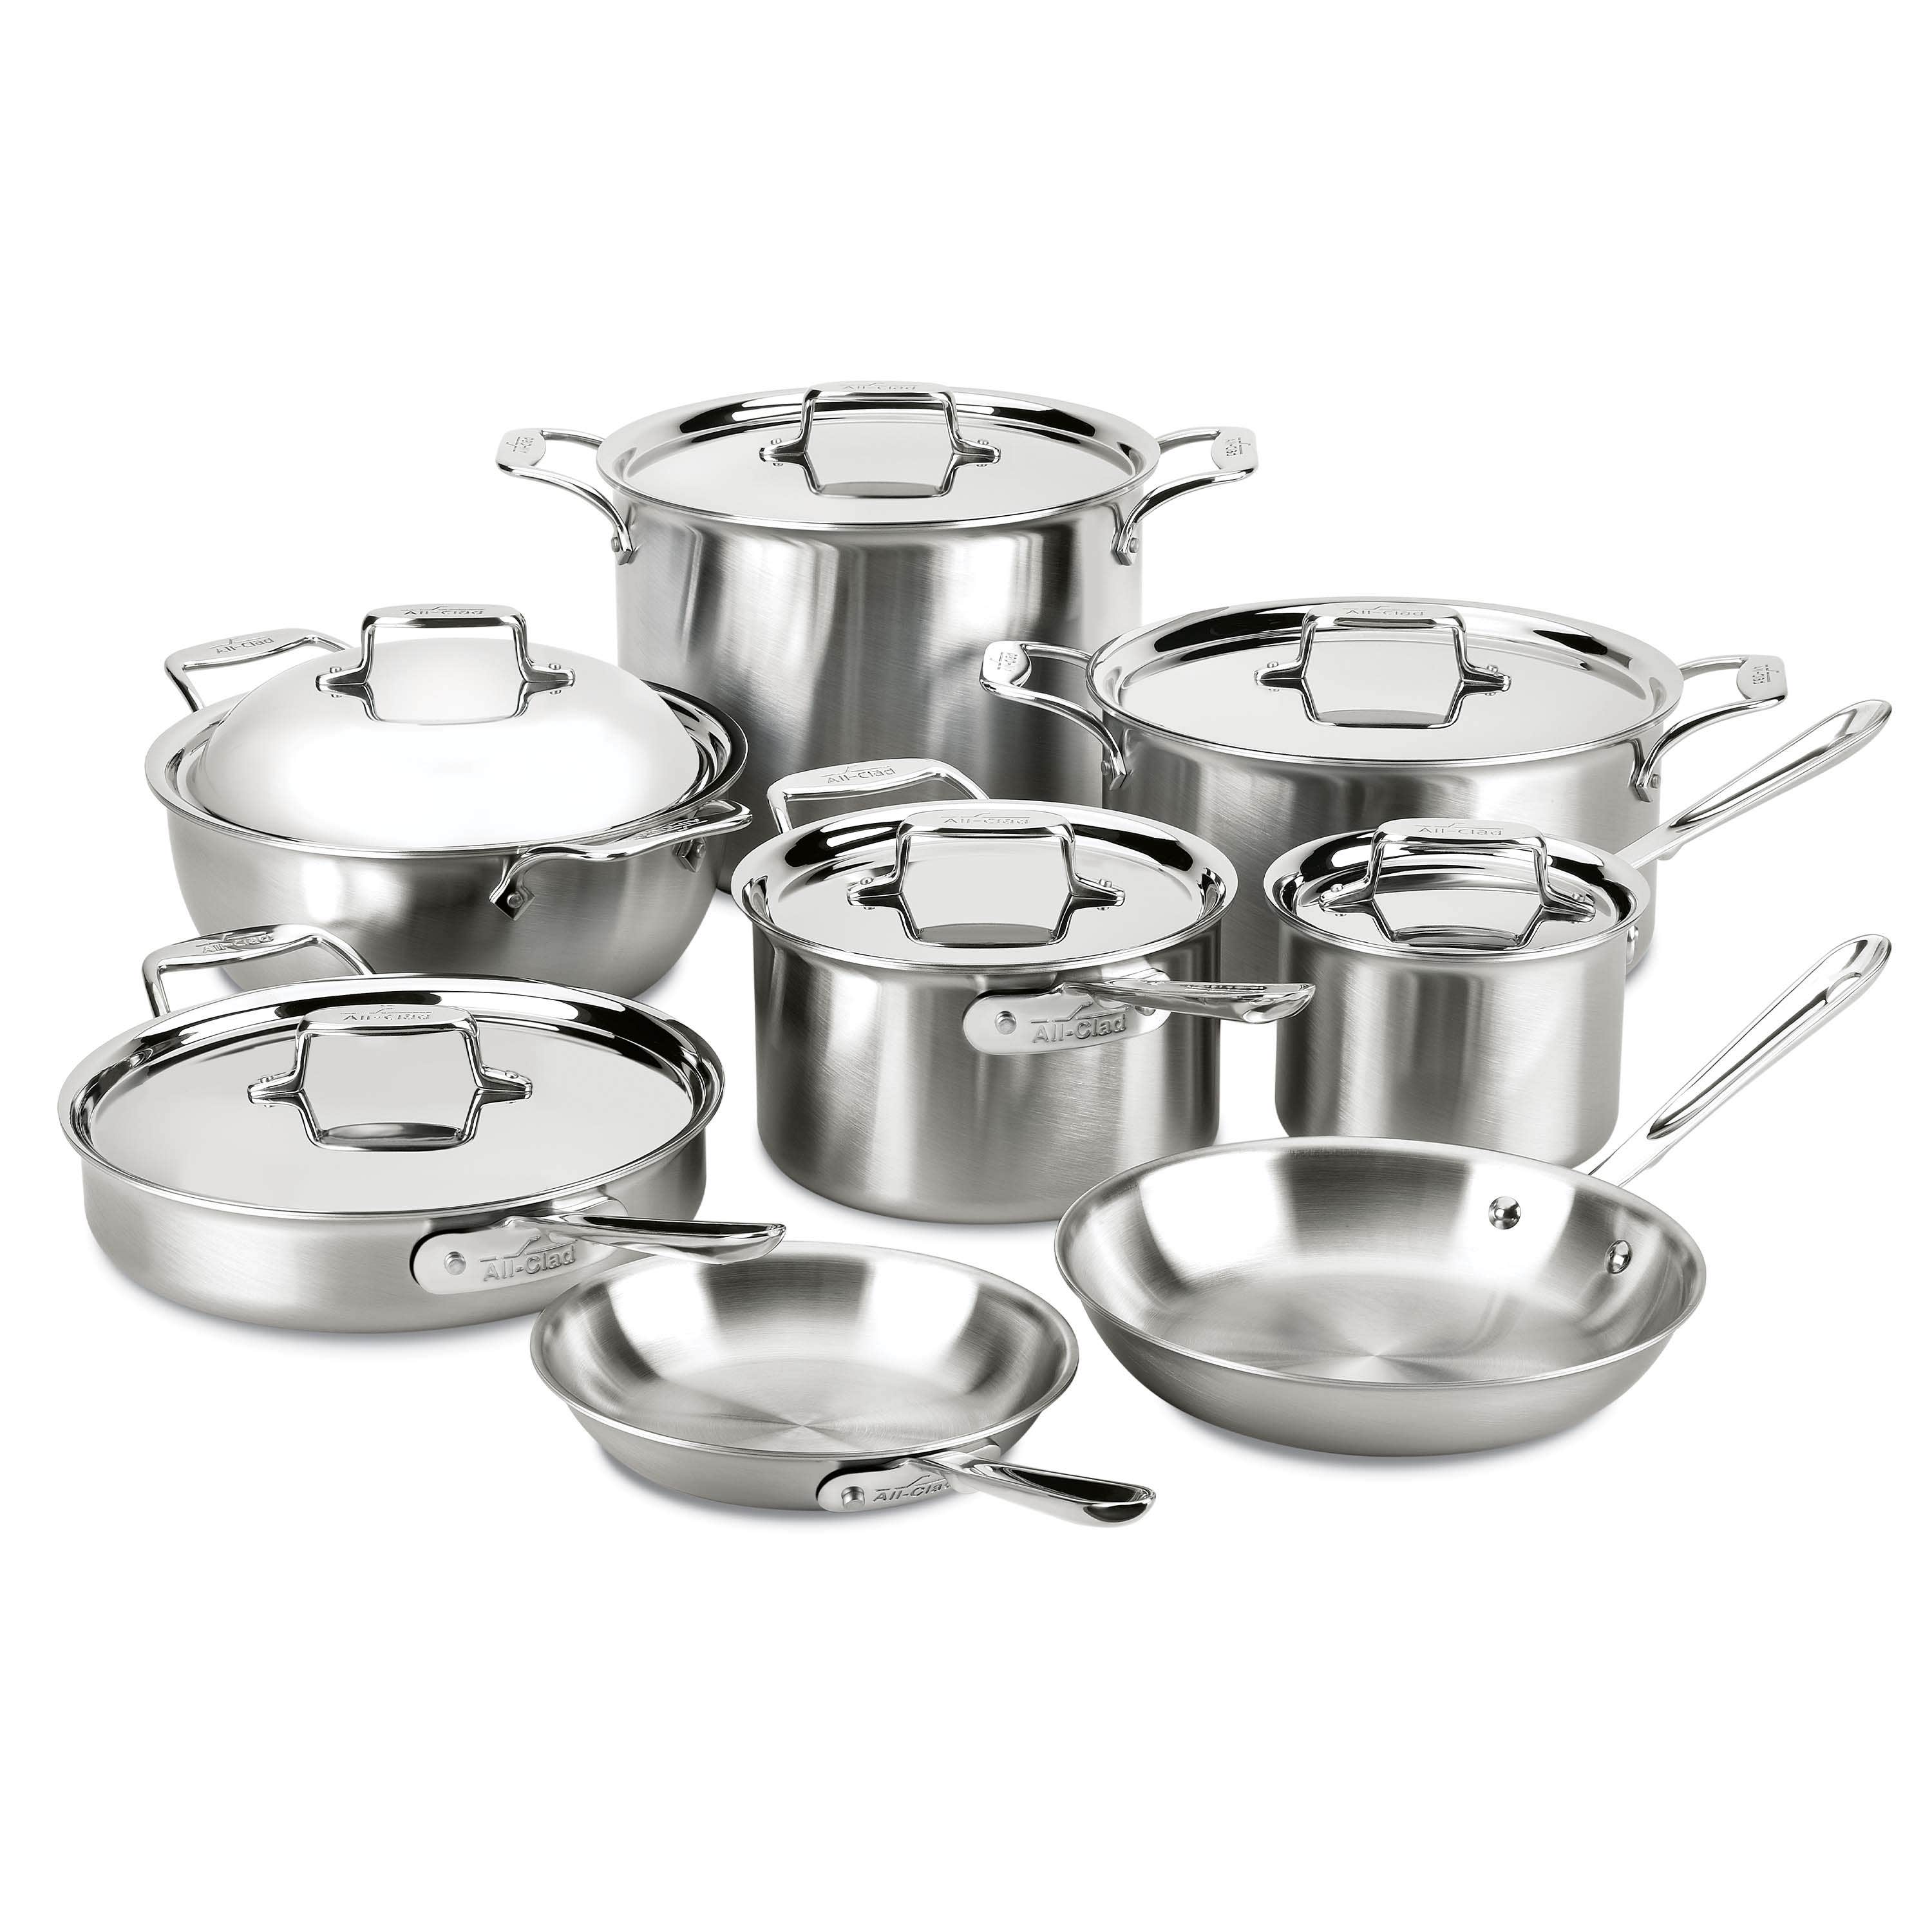 All-Clad BD55108 Brushed D5 Stainless Steel 5-Ply Bonded 8 inch Fry-Pan 